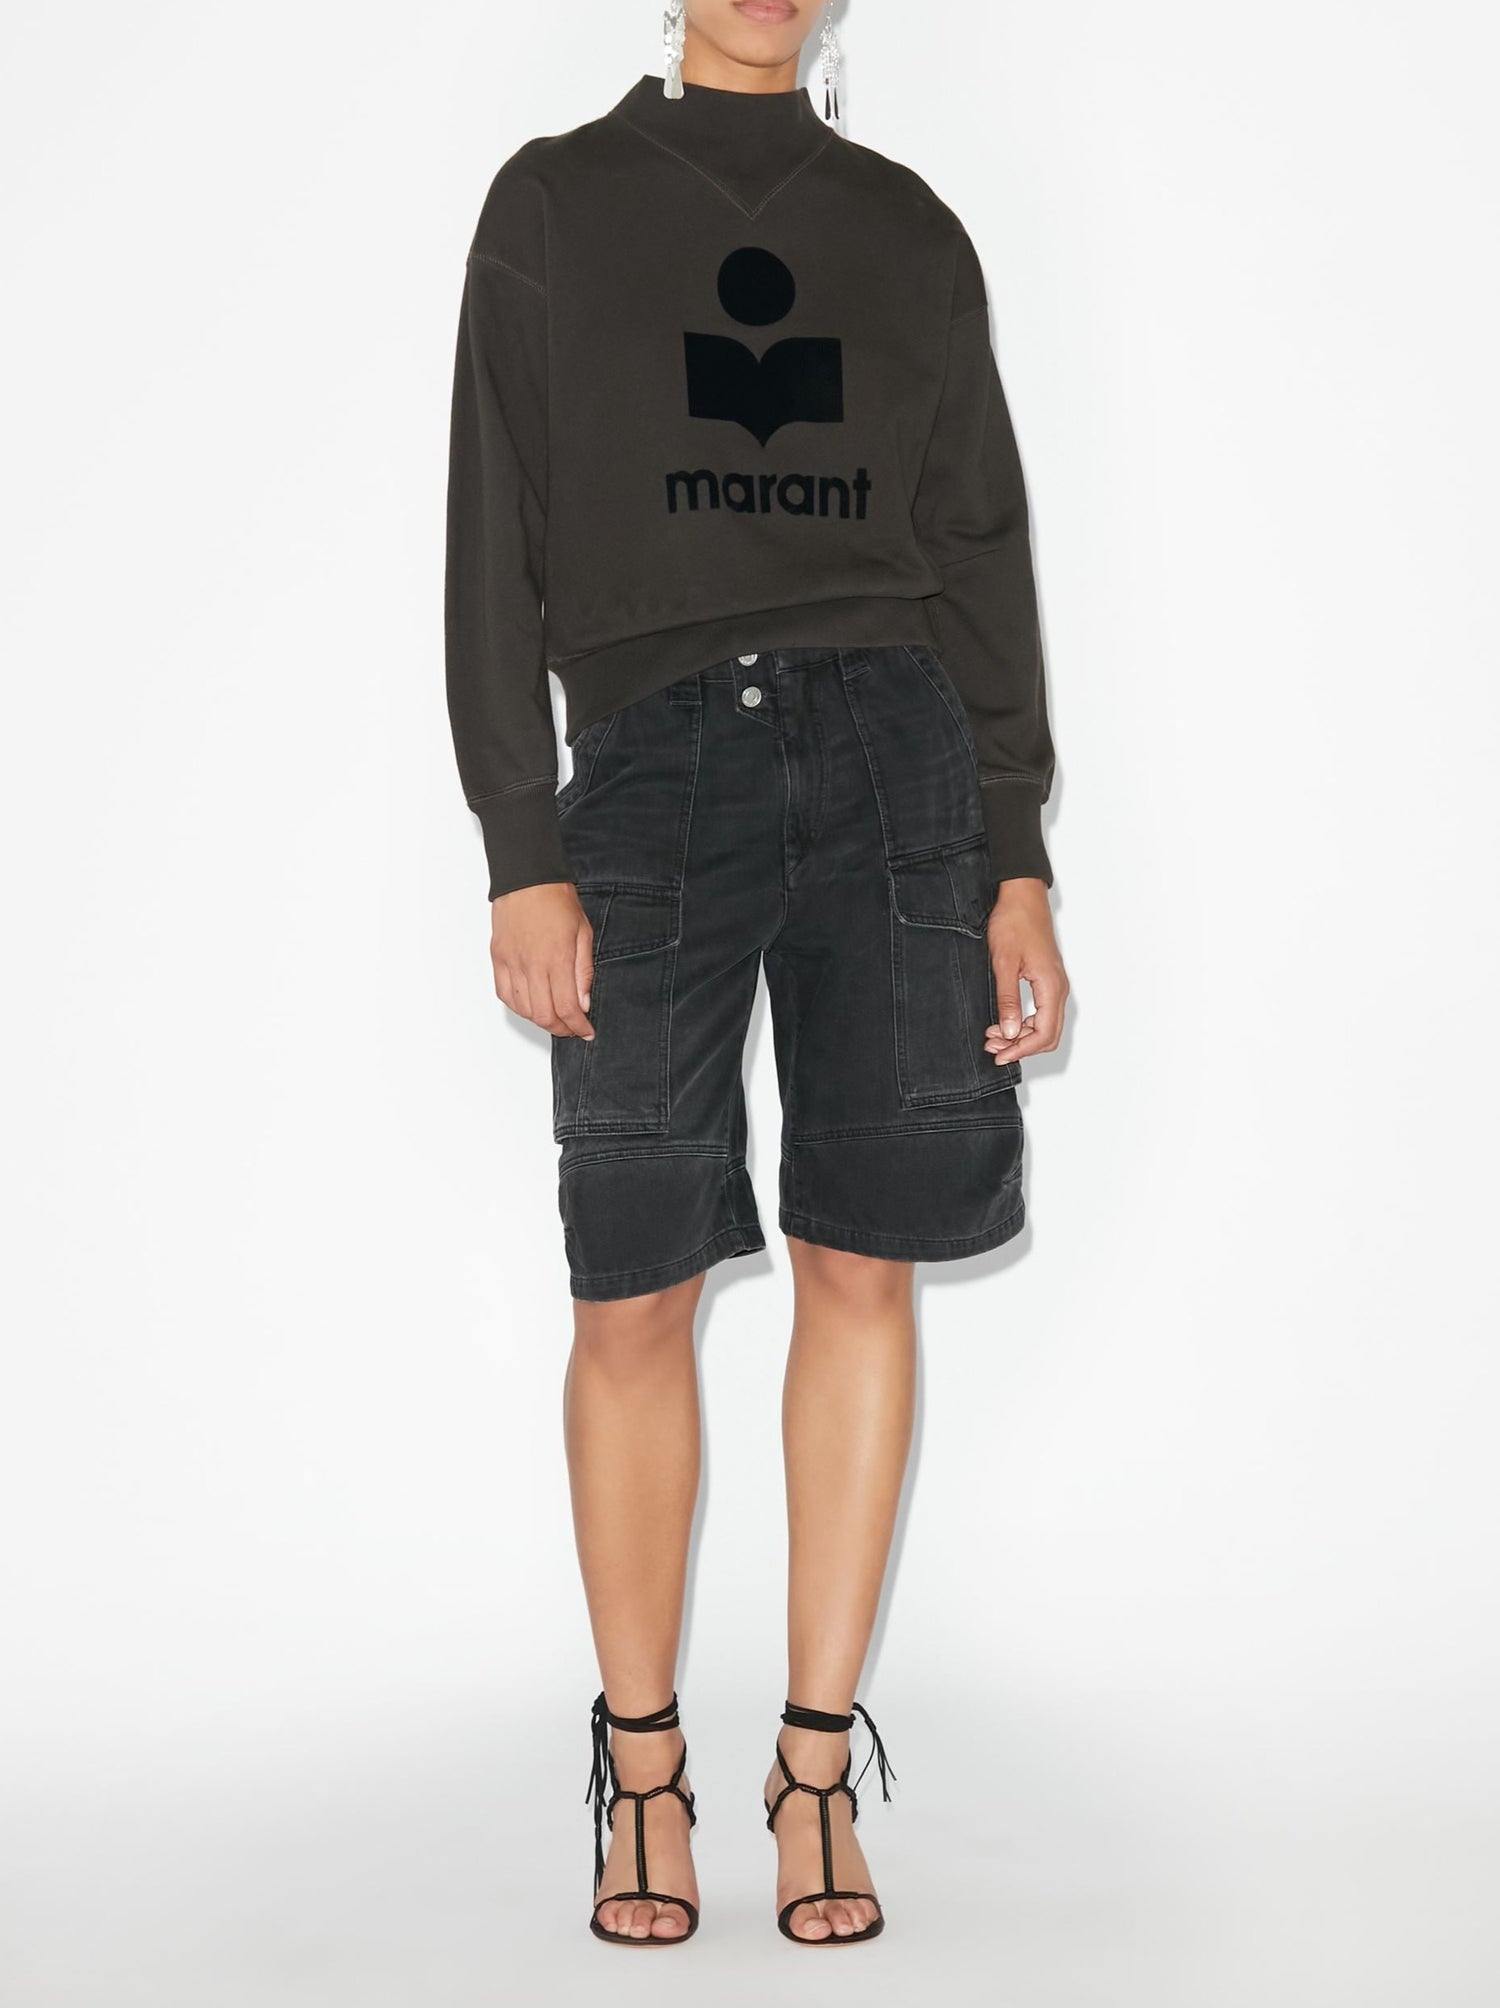 MOBY sweater, faded black